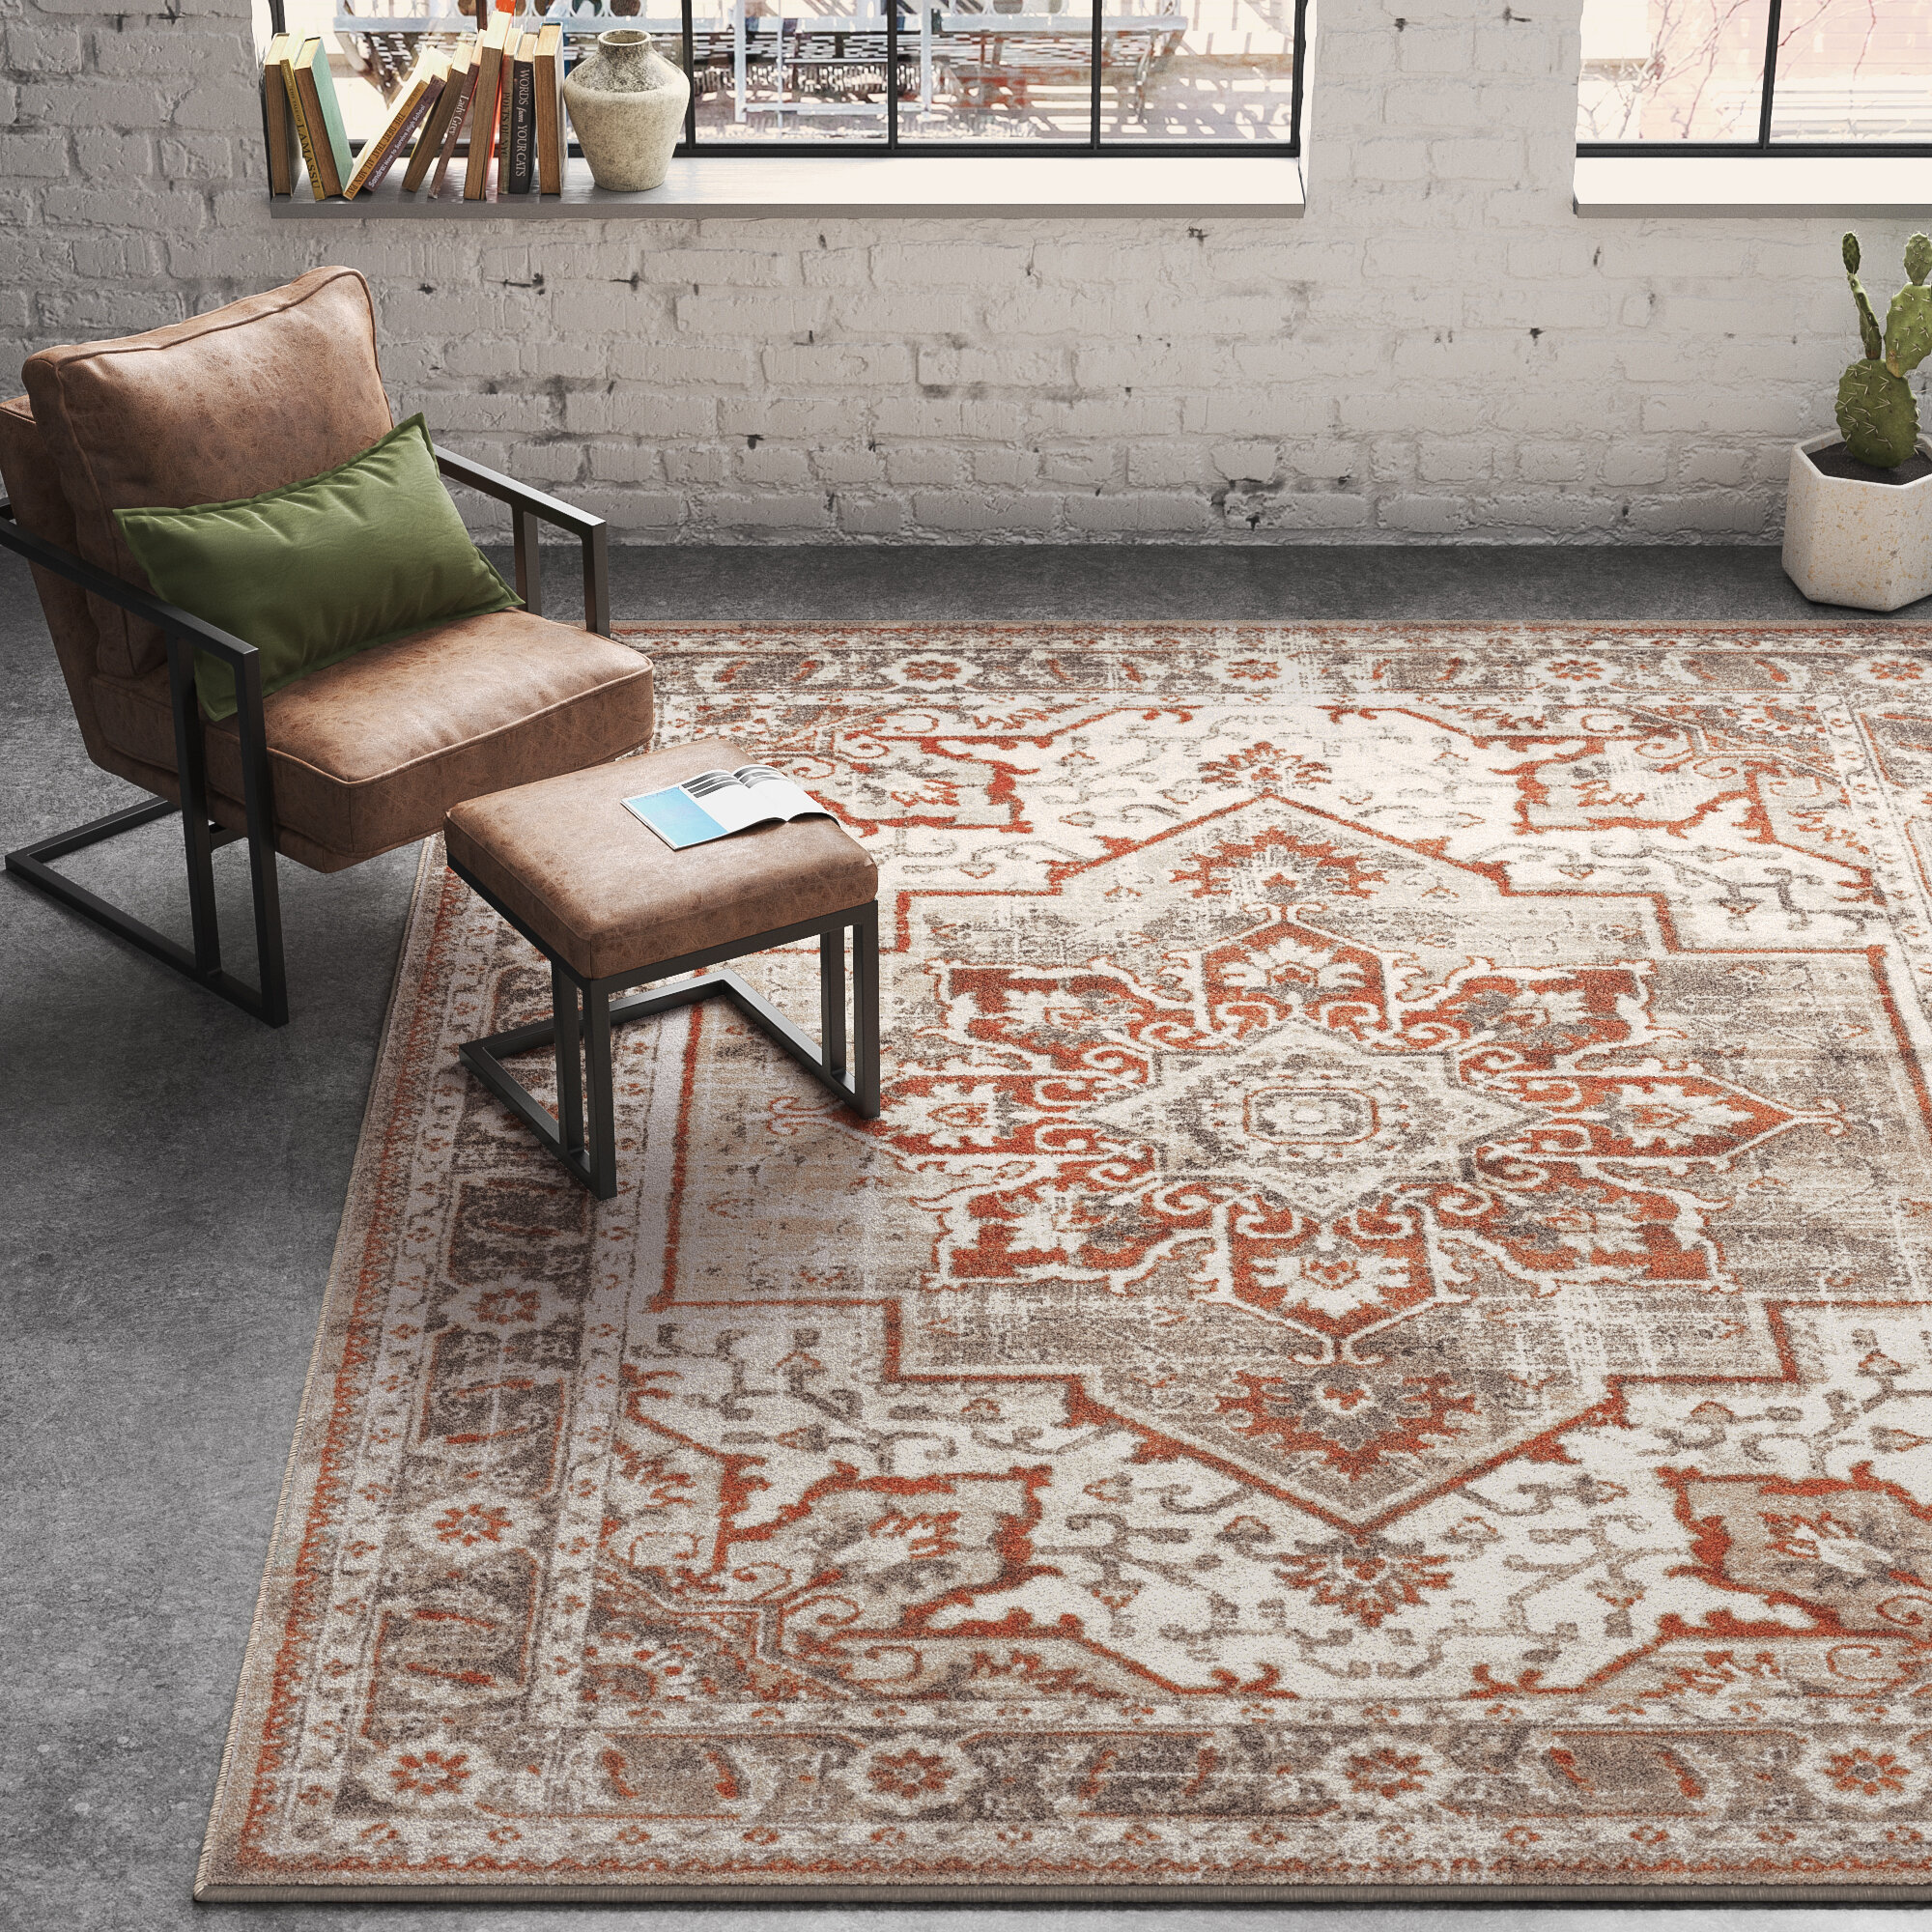 New Persian Oriental Design Rugs Super Soft Silky High QUALITY Floor Carpet Rugs 